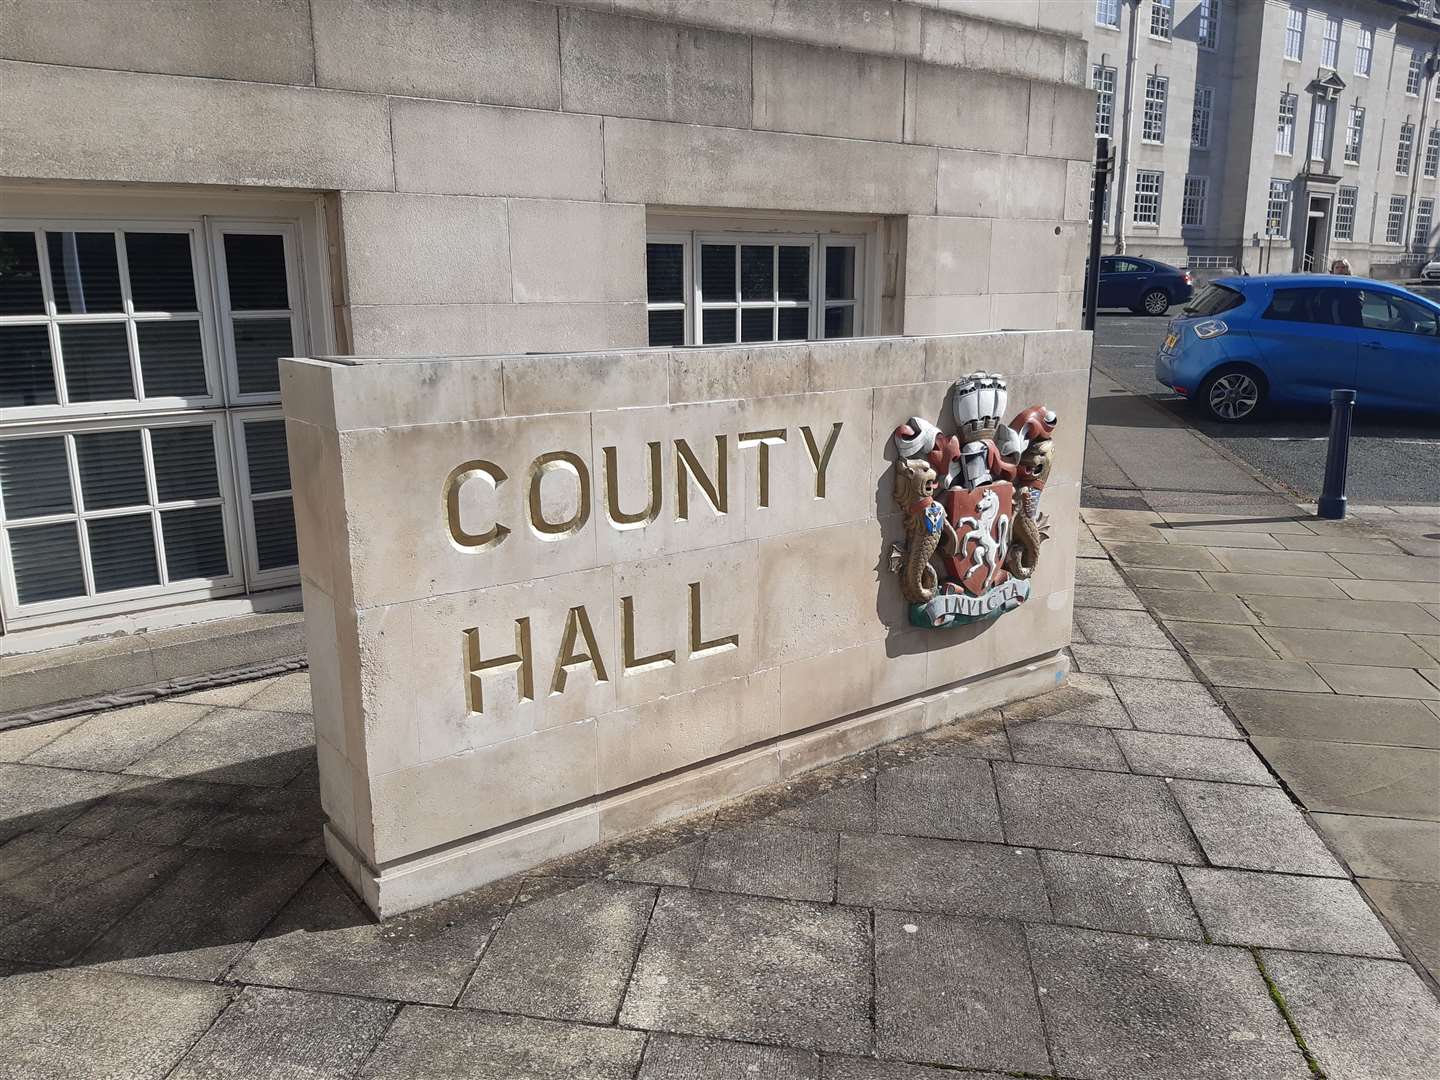 An inquest was held at County Hall in Maidstone